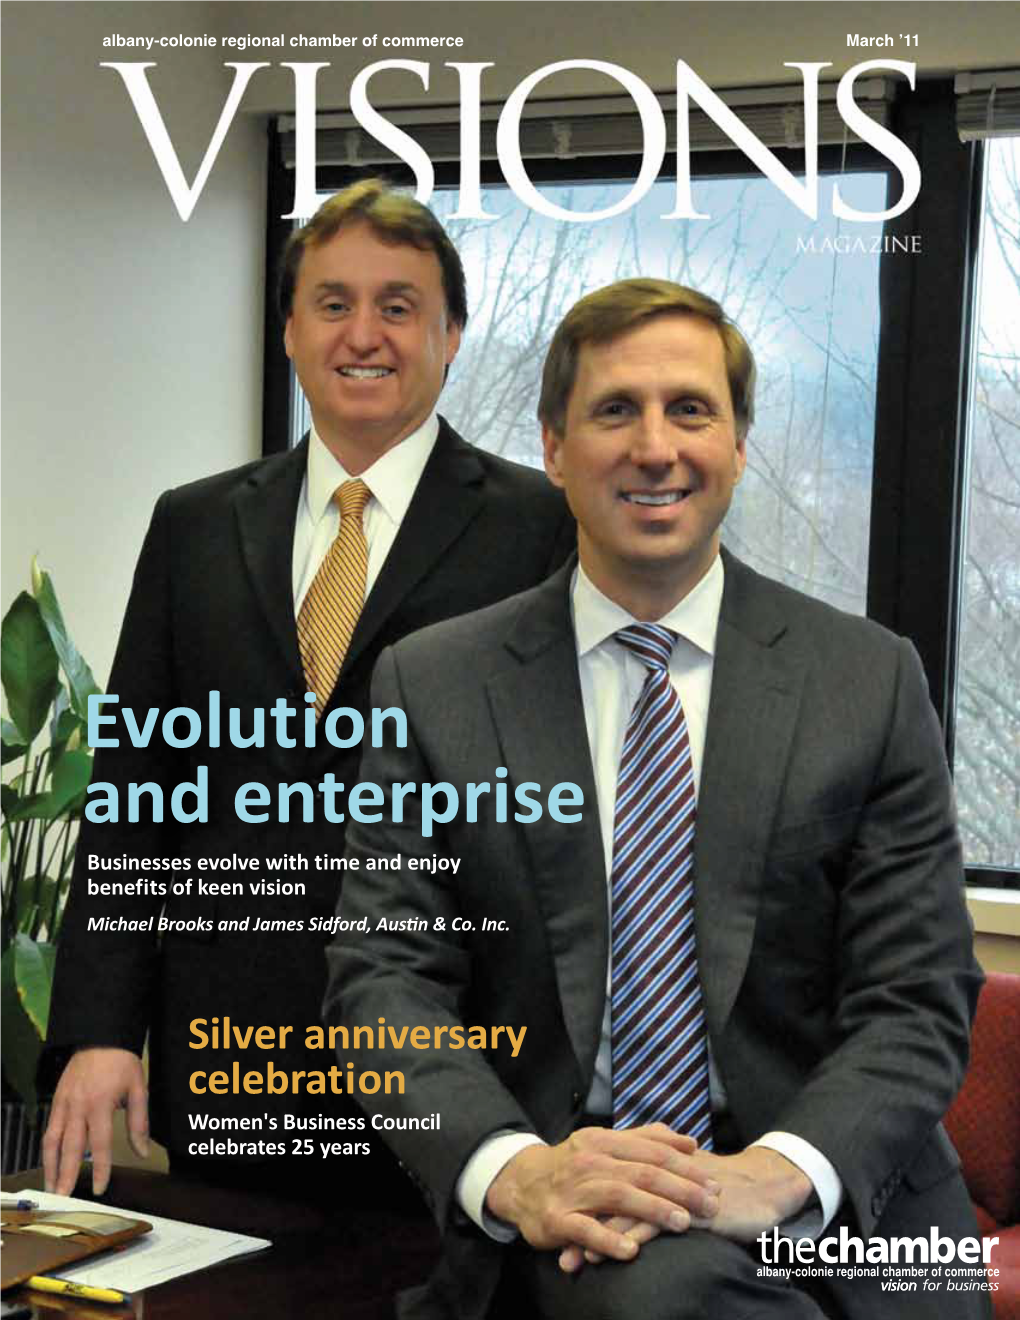 Evolution and Enterprise Businesses Evolve with Time and Enjoy Benefits of Keen Vision Michael Brooks and James Sidford, Austin & Co